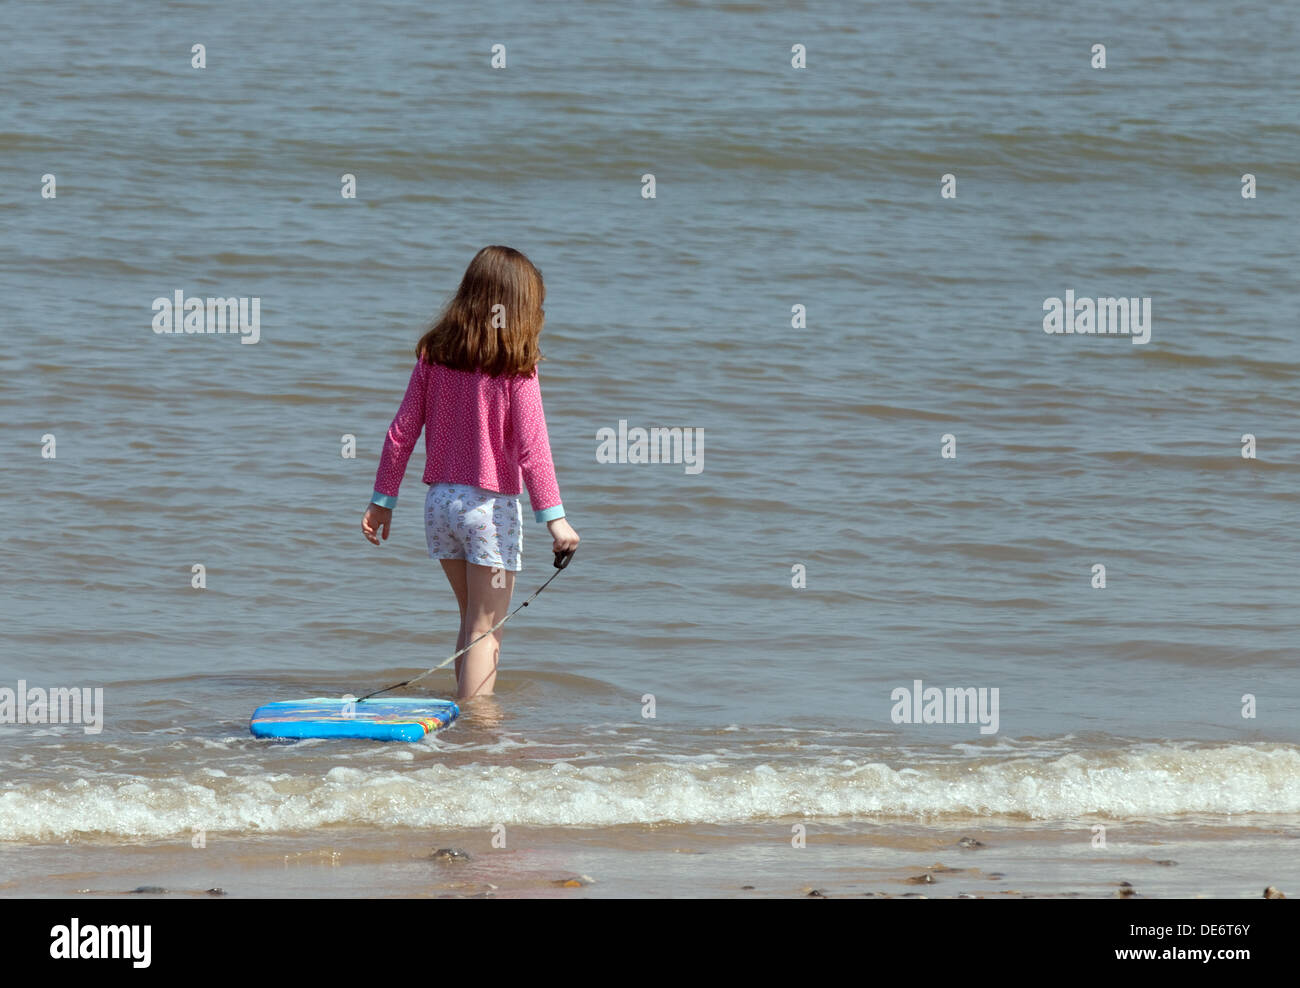 Young girl age 5-6 years paddling in the sea on the beach on summer holiday, Mundesley Beach, Norfolk, UK Stock Photo